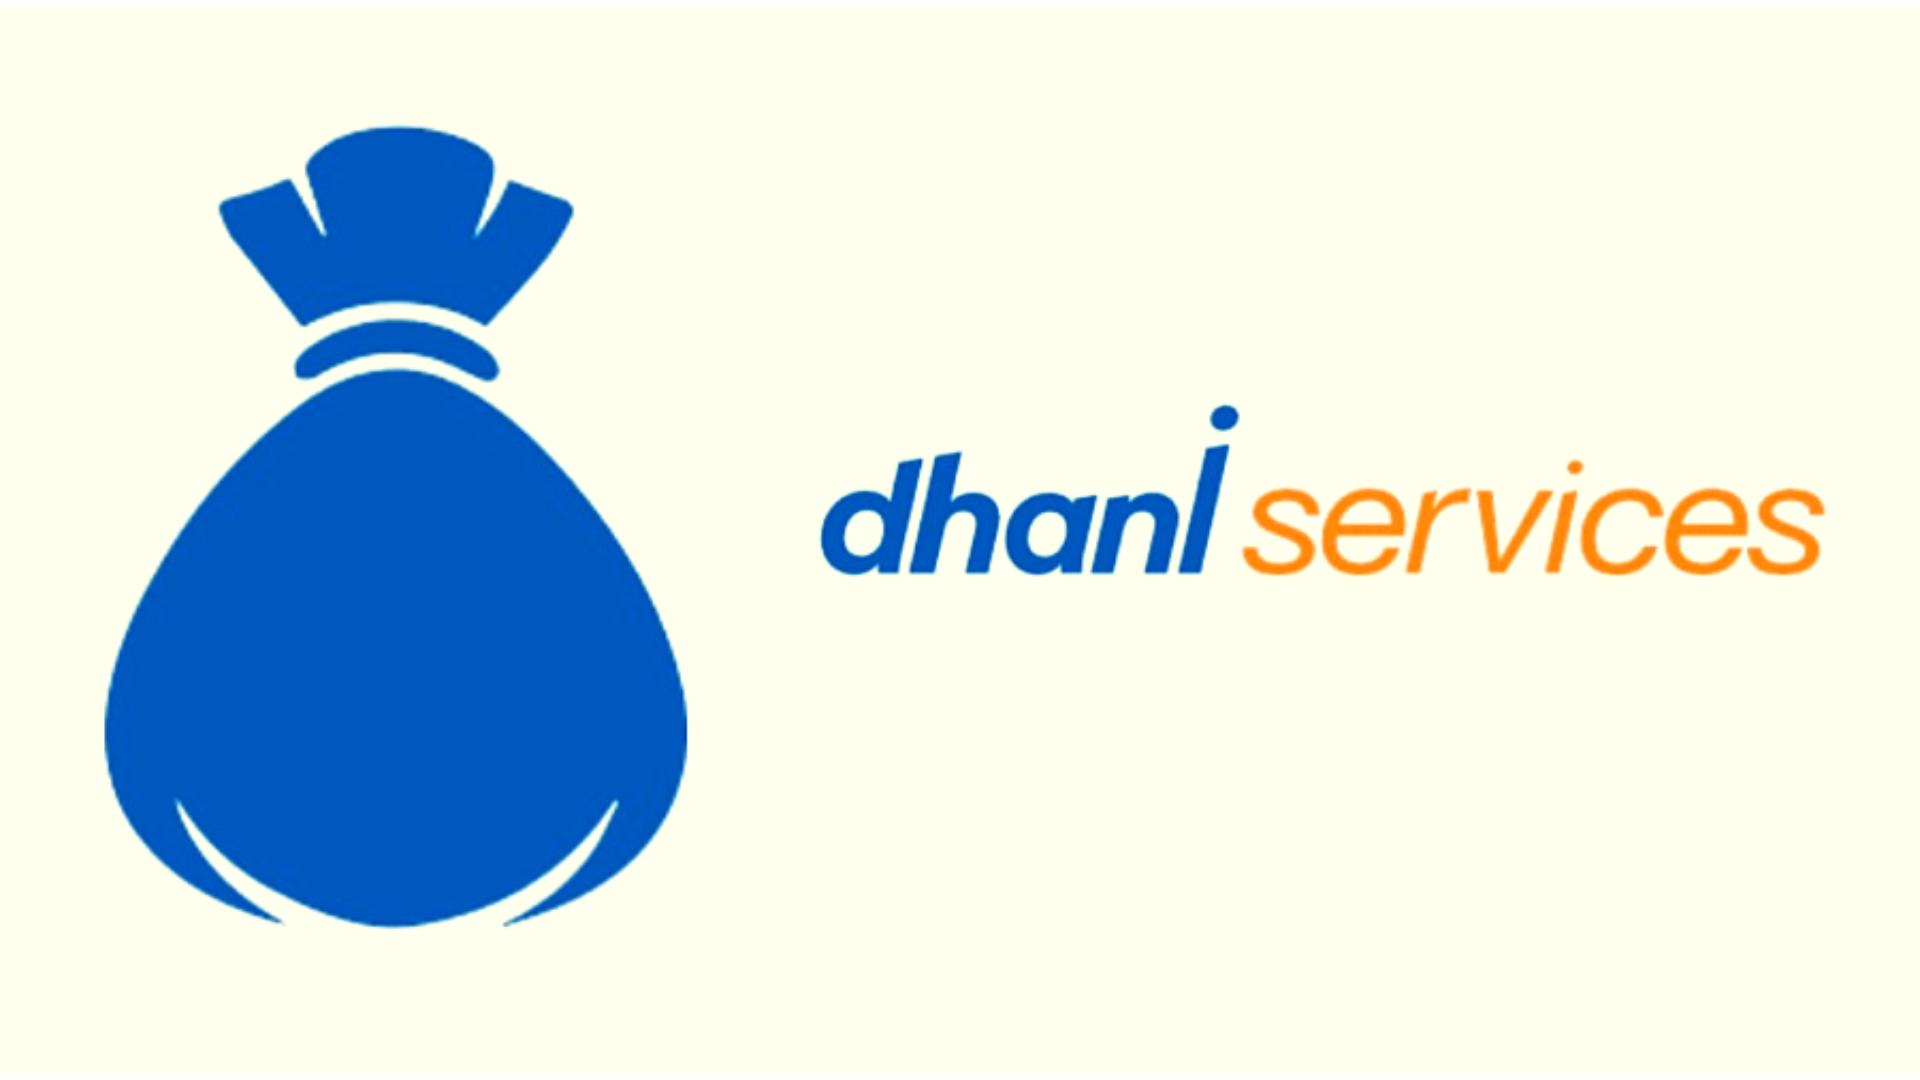 Dhani App Referral Code - Refer Friends and Earn Upto Rs.10,000 Instantly